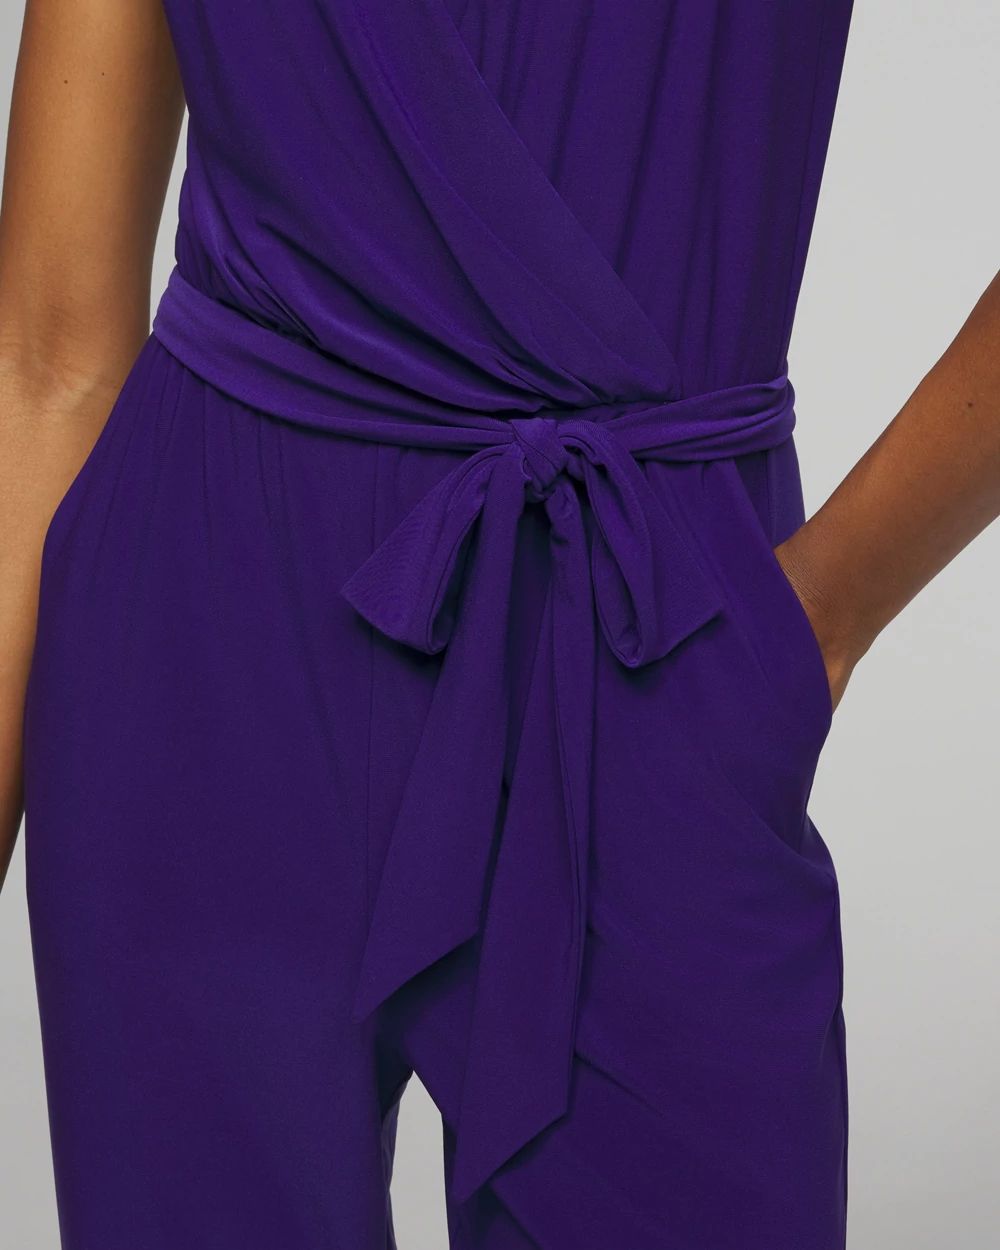 Outlet WHBM Sleeveless Tapered Leg Jumpsuit click to view larger image.